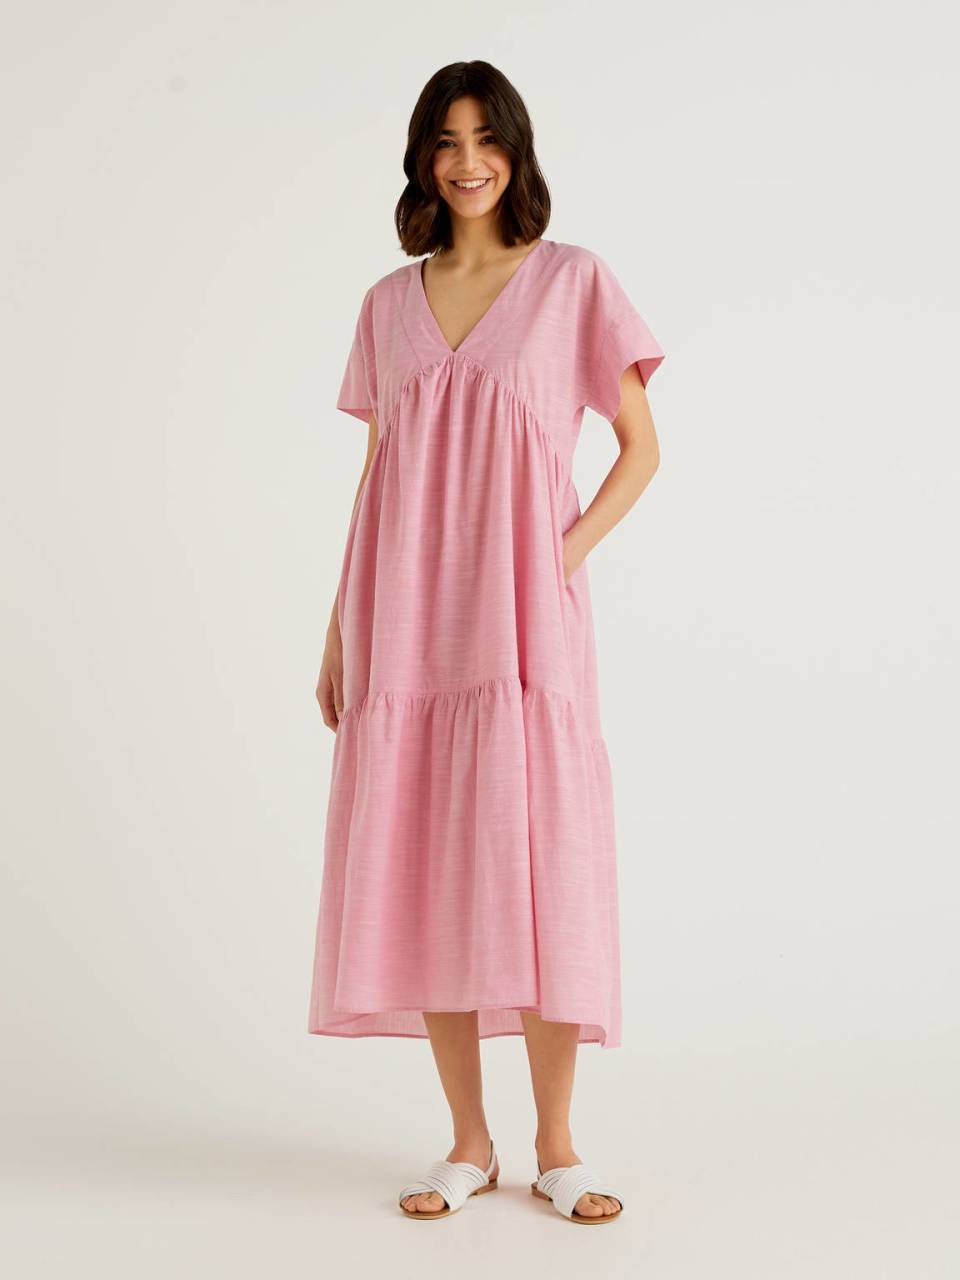 Benetton Beach cover-up dress in pure cotton. 1